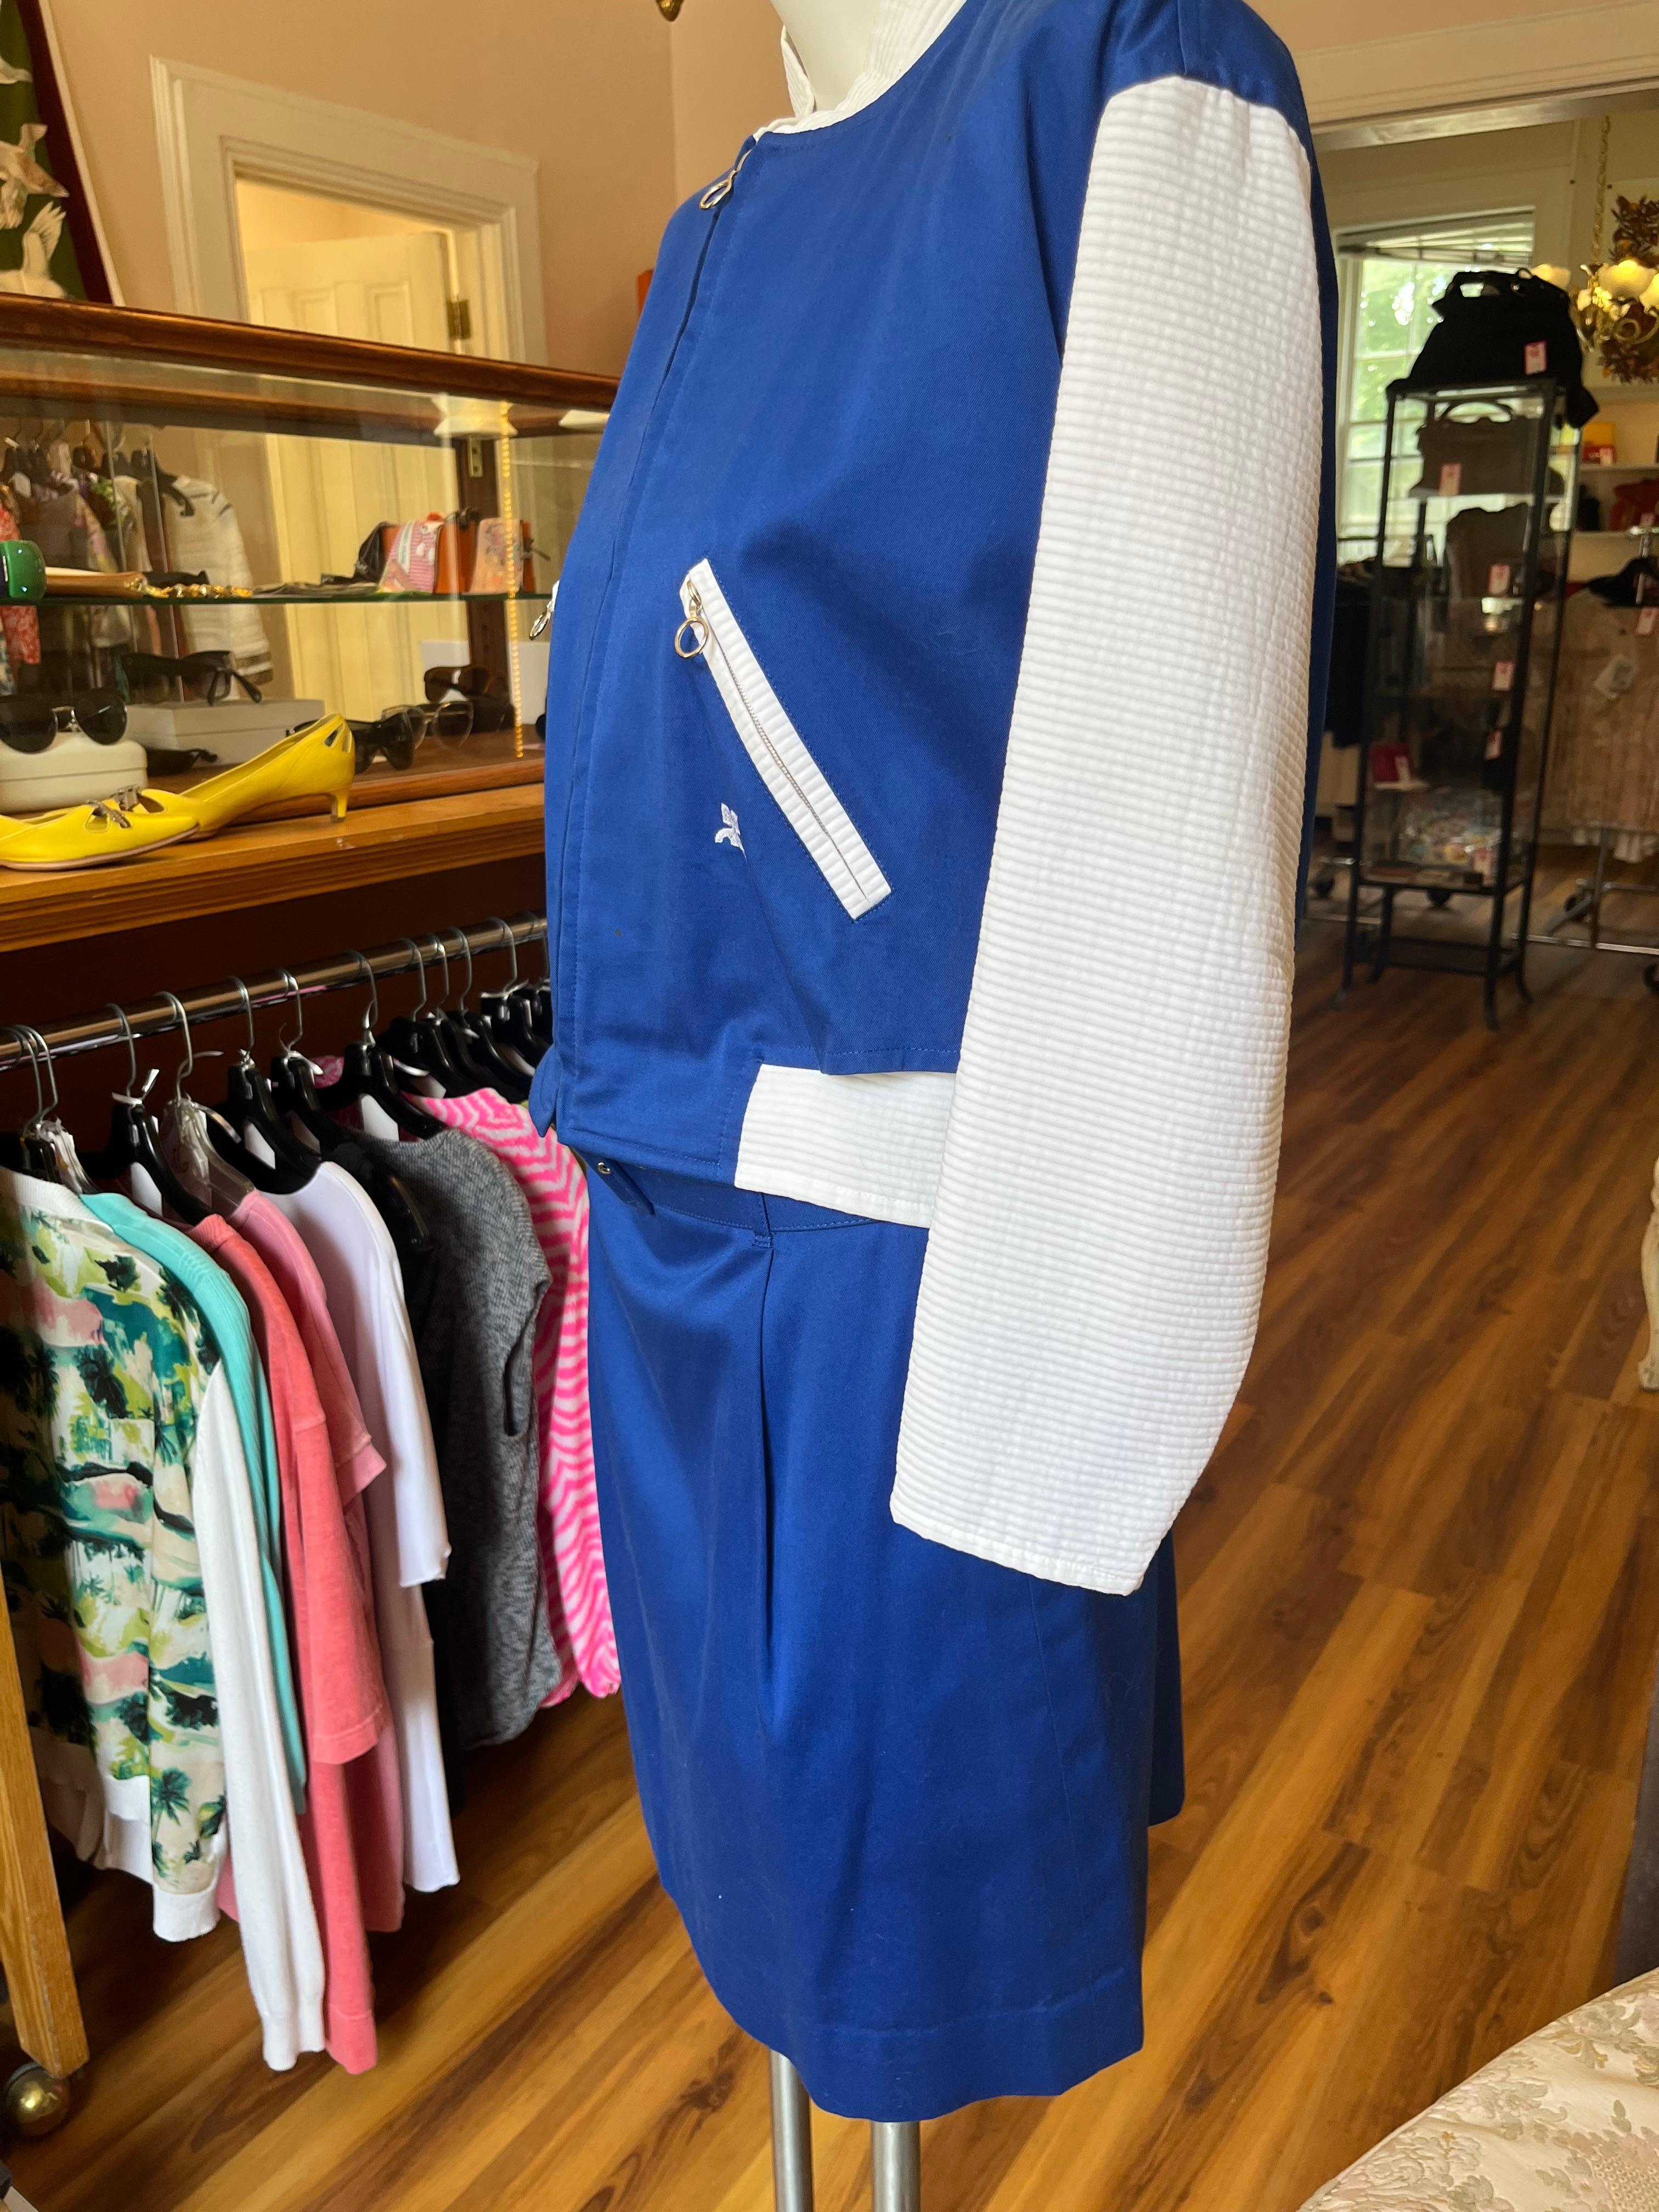 1960s Andre Courreges Skirt Suit (42 fr) 3-Piece Suit (Jacket, Skirt and Shorts) In Good Condition For Sale In Port Hope, ON